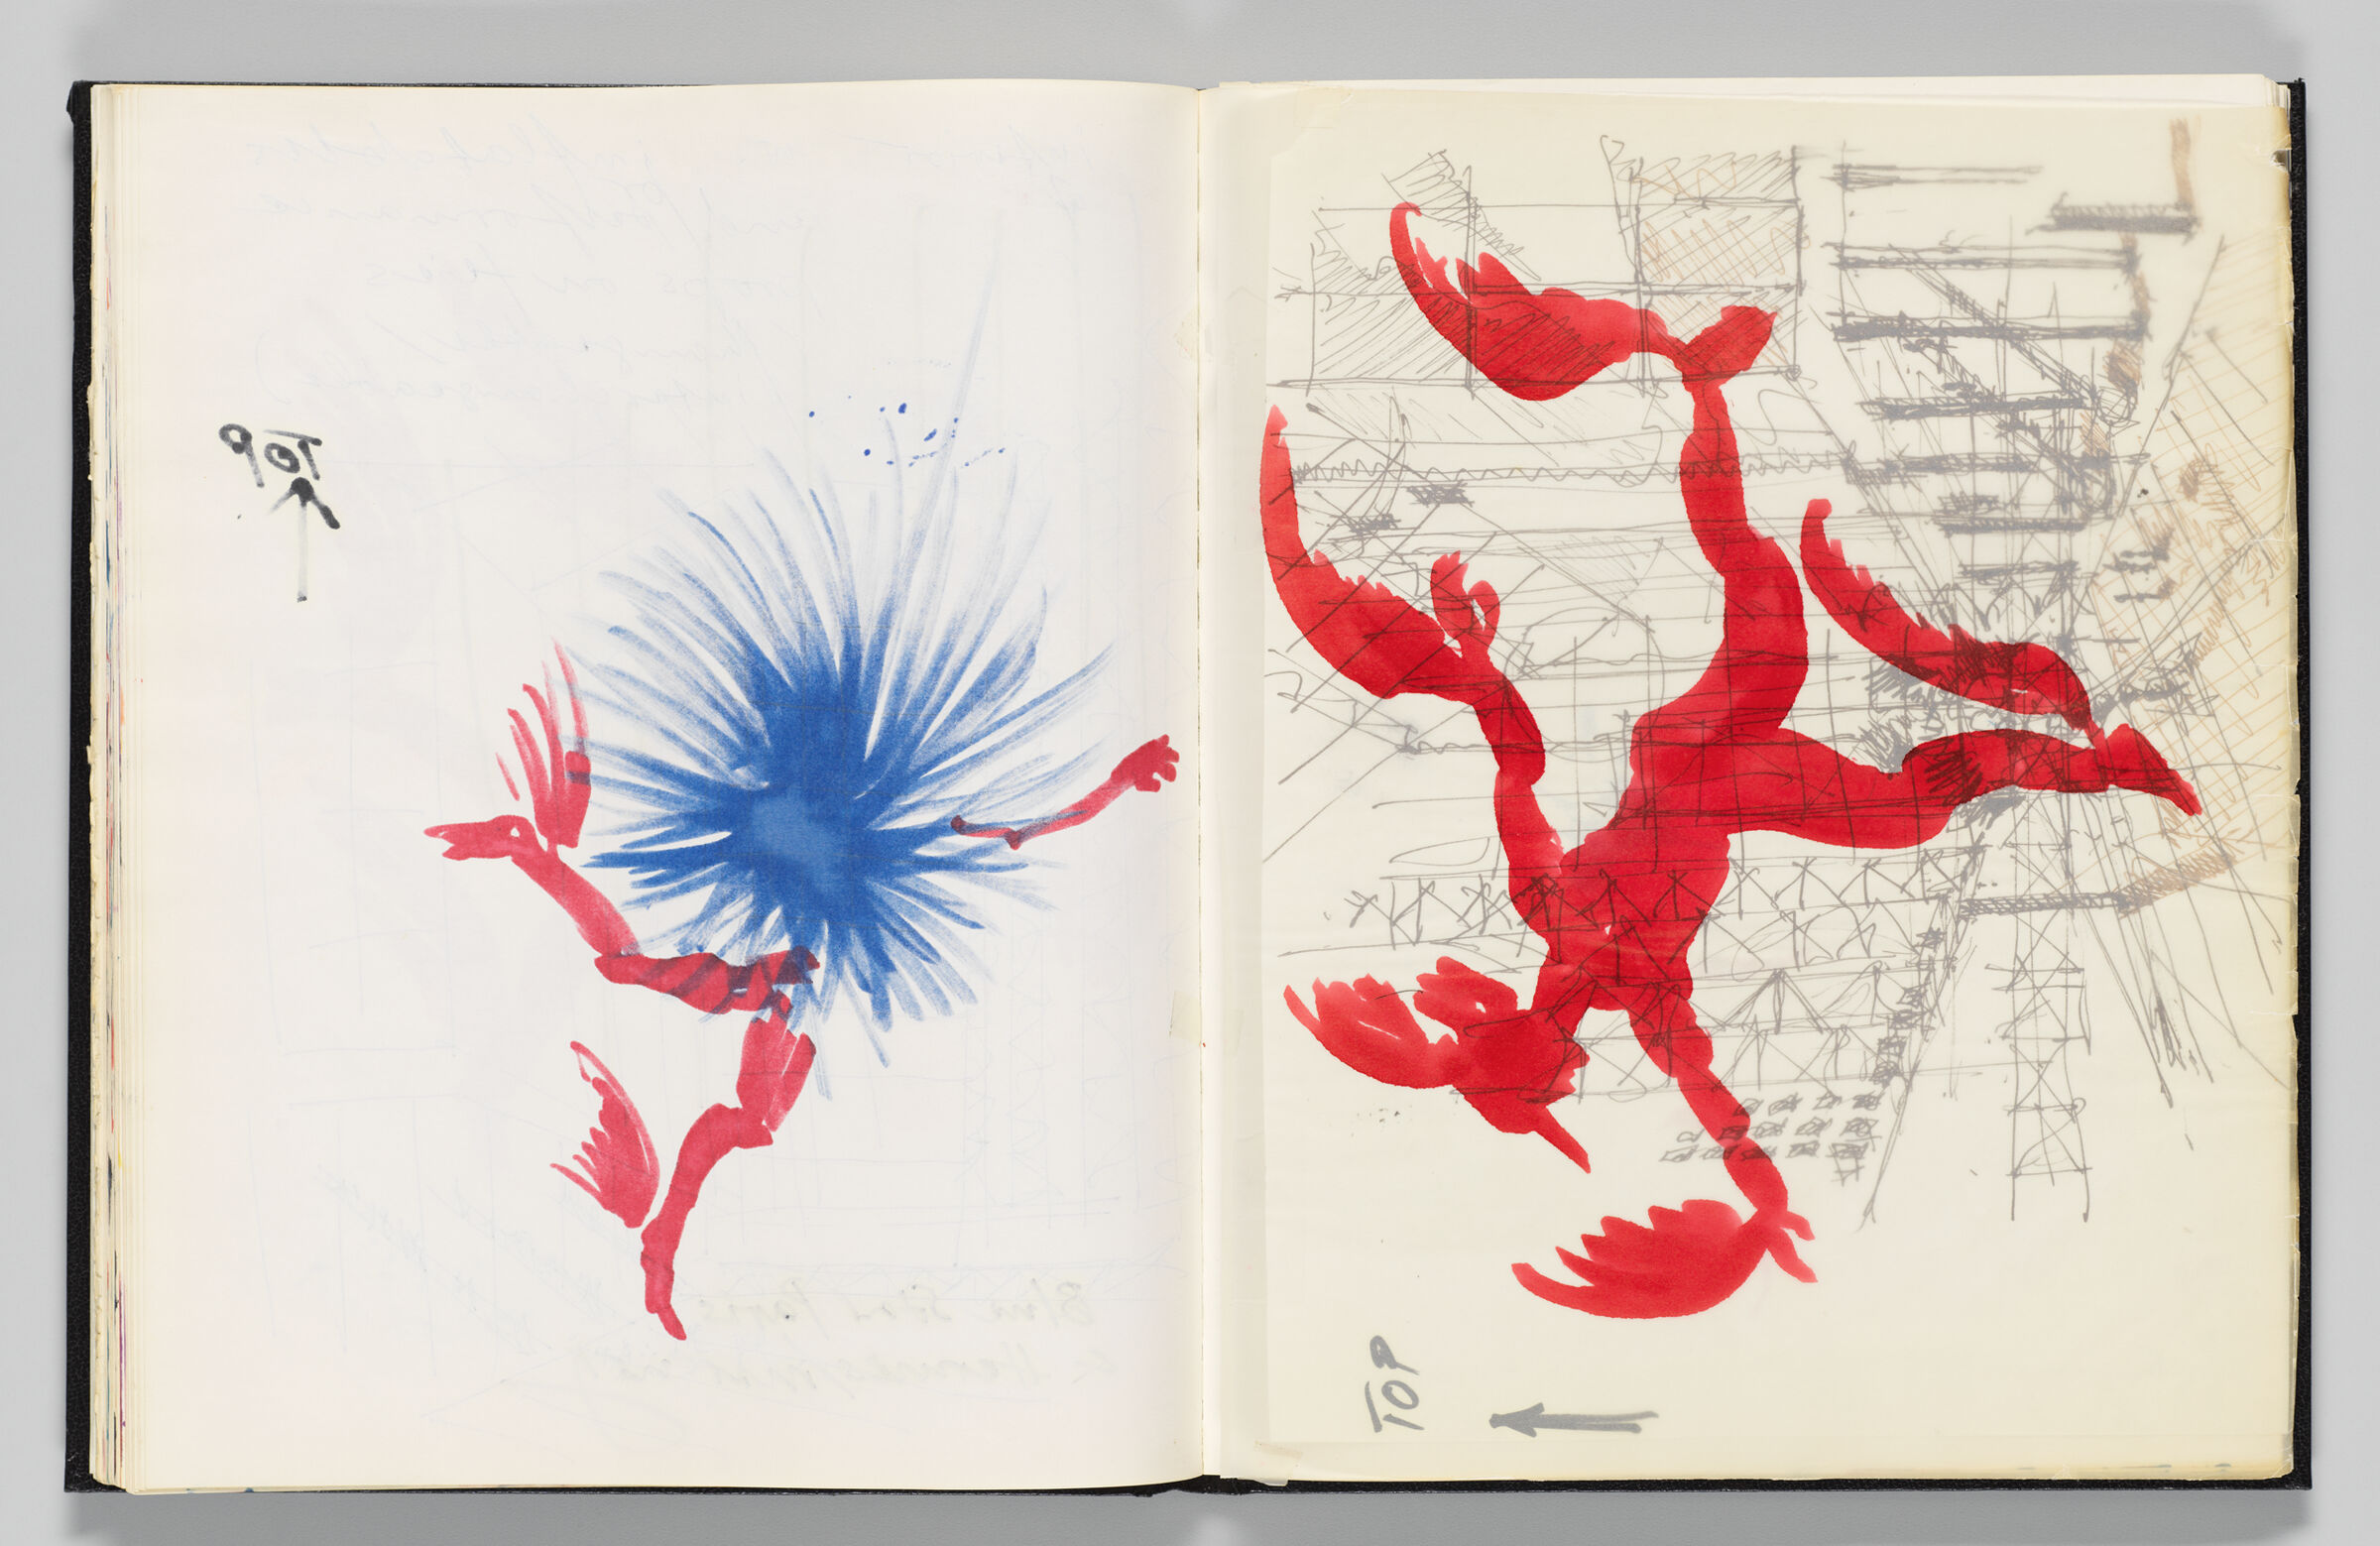 Untitled (Bleed-Through Of Previous Page, Left Page); Untitled (Hermes Sketch On Transparent Sheet Atop Inserted Sketch, Right Page)